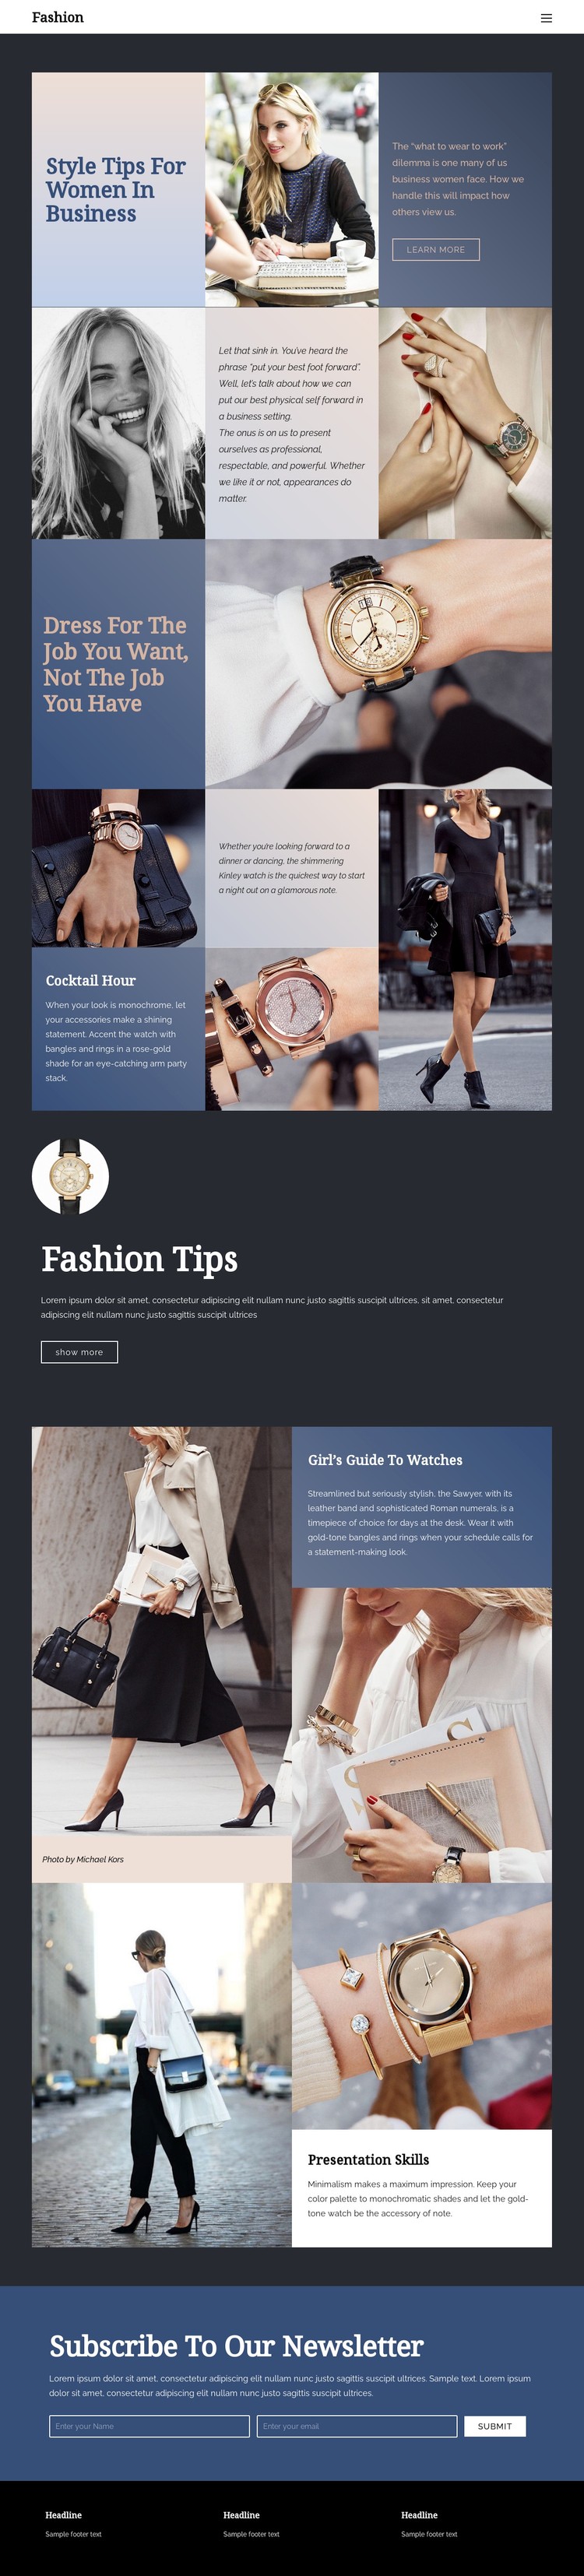 Tips to succeed in fashion Webflow Template Alternative